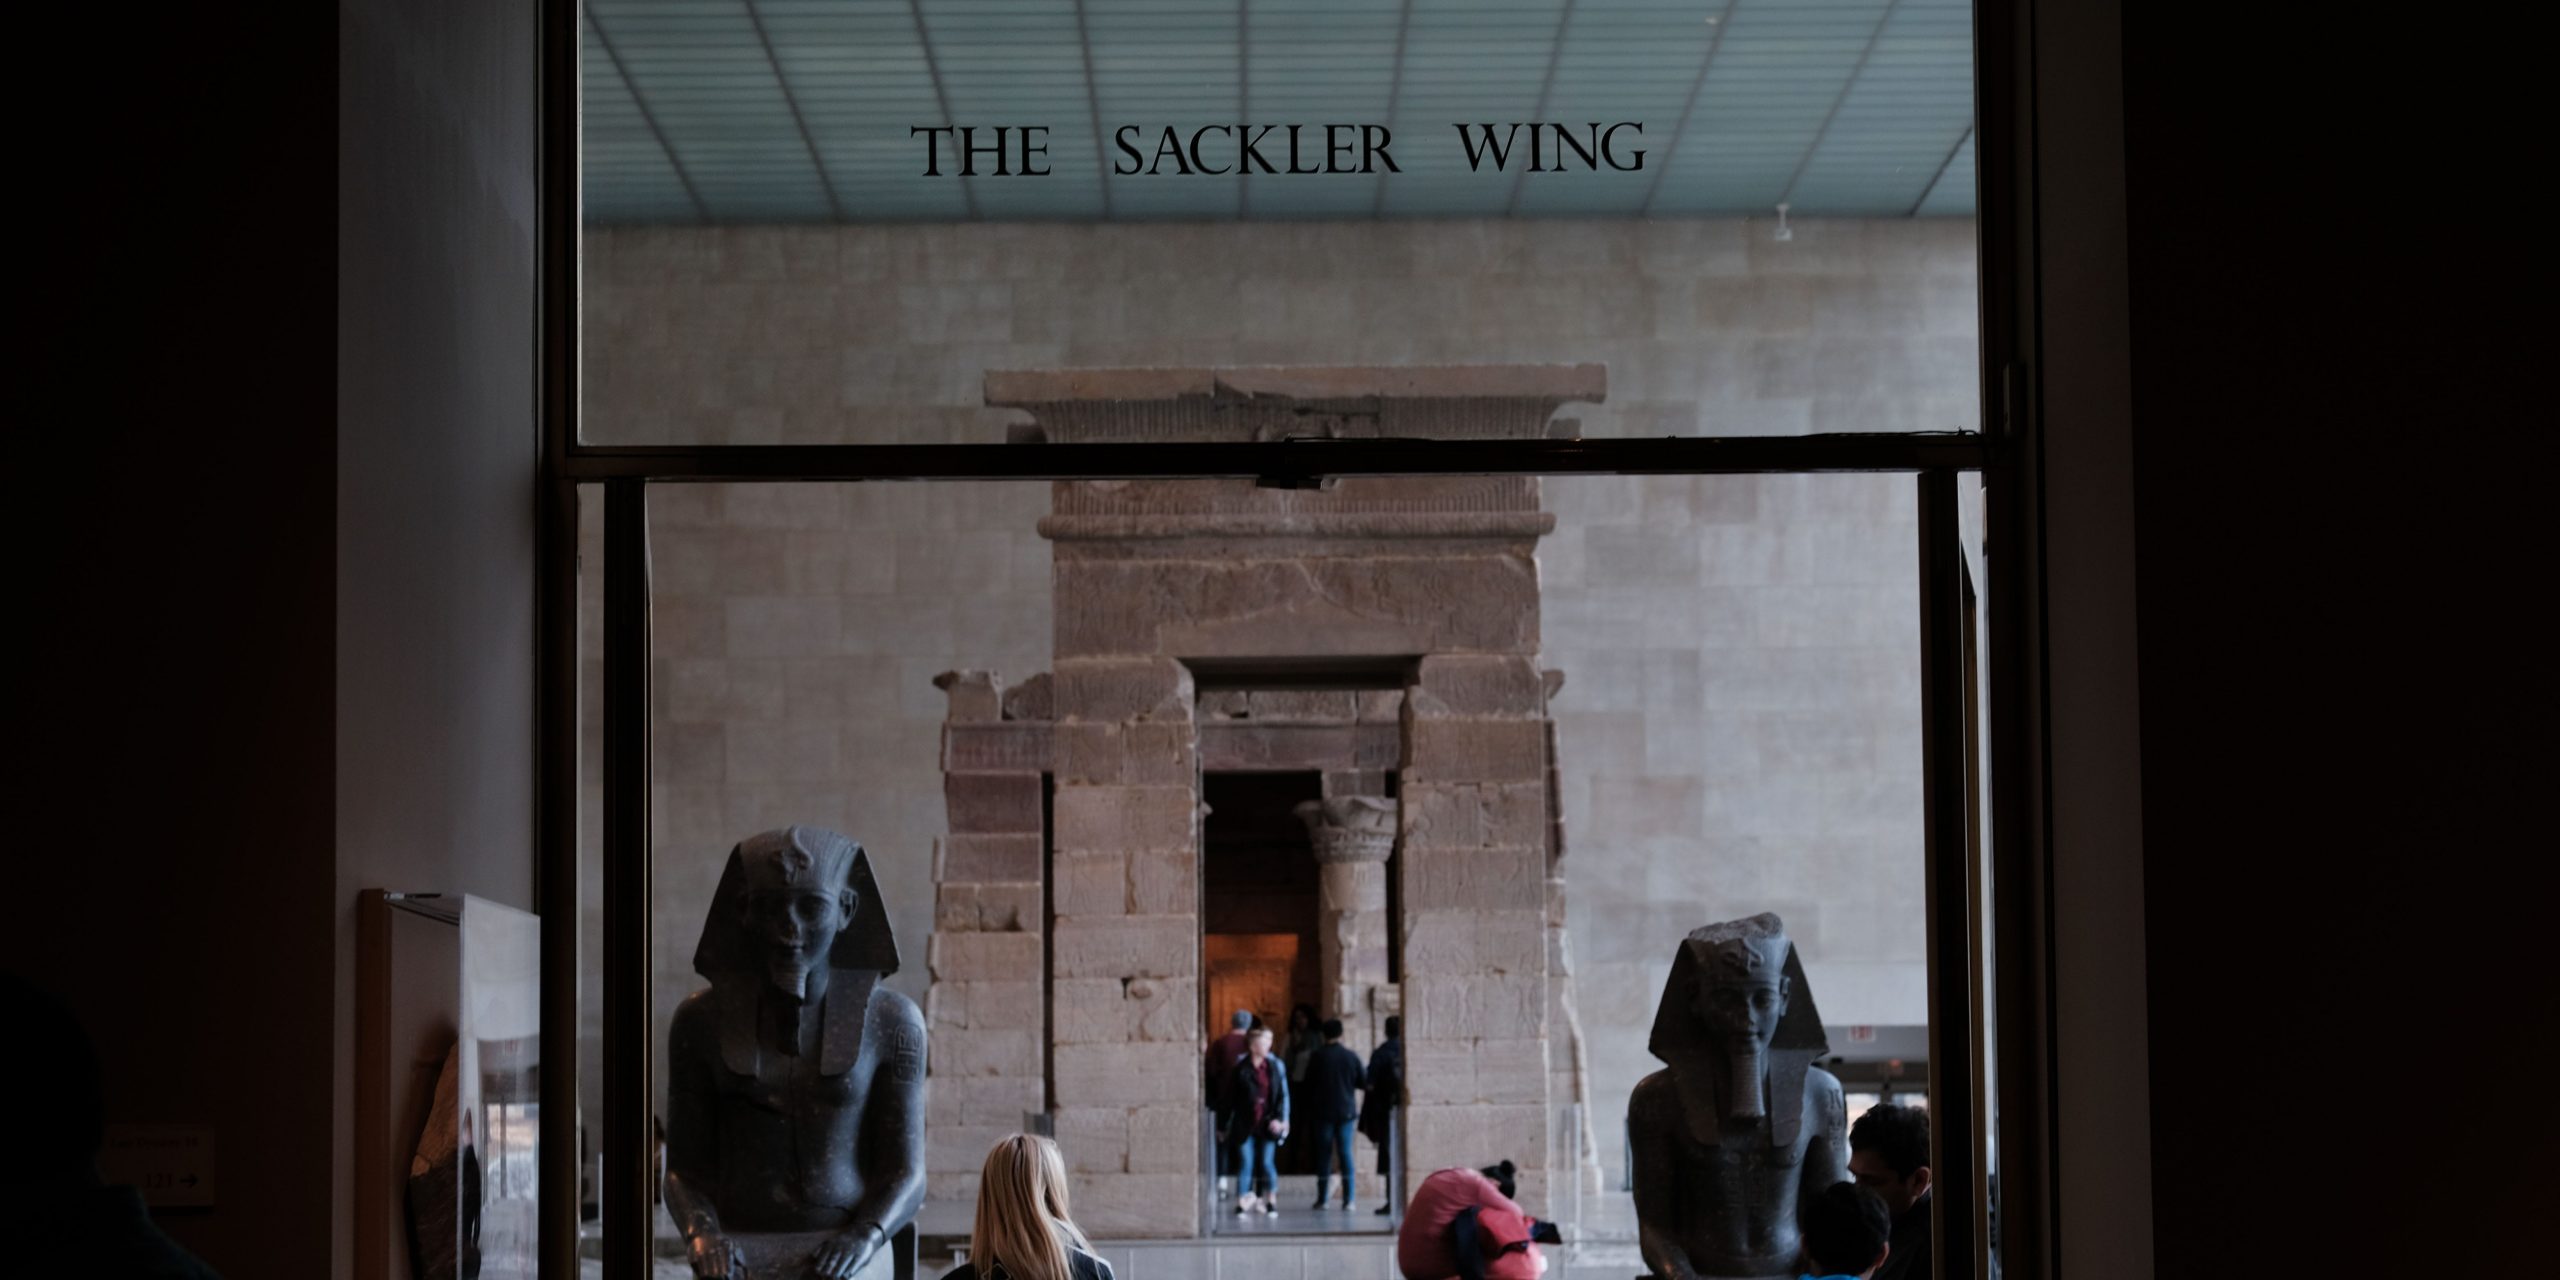 Entrance to The Sackler Wing at The Met